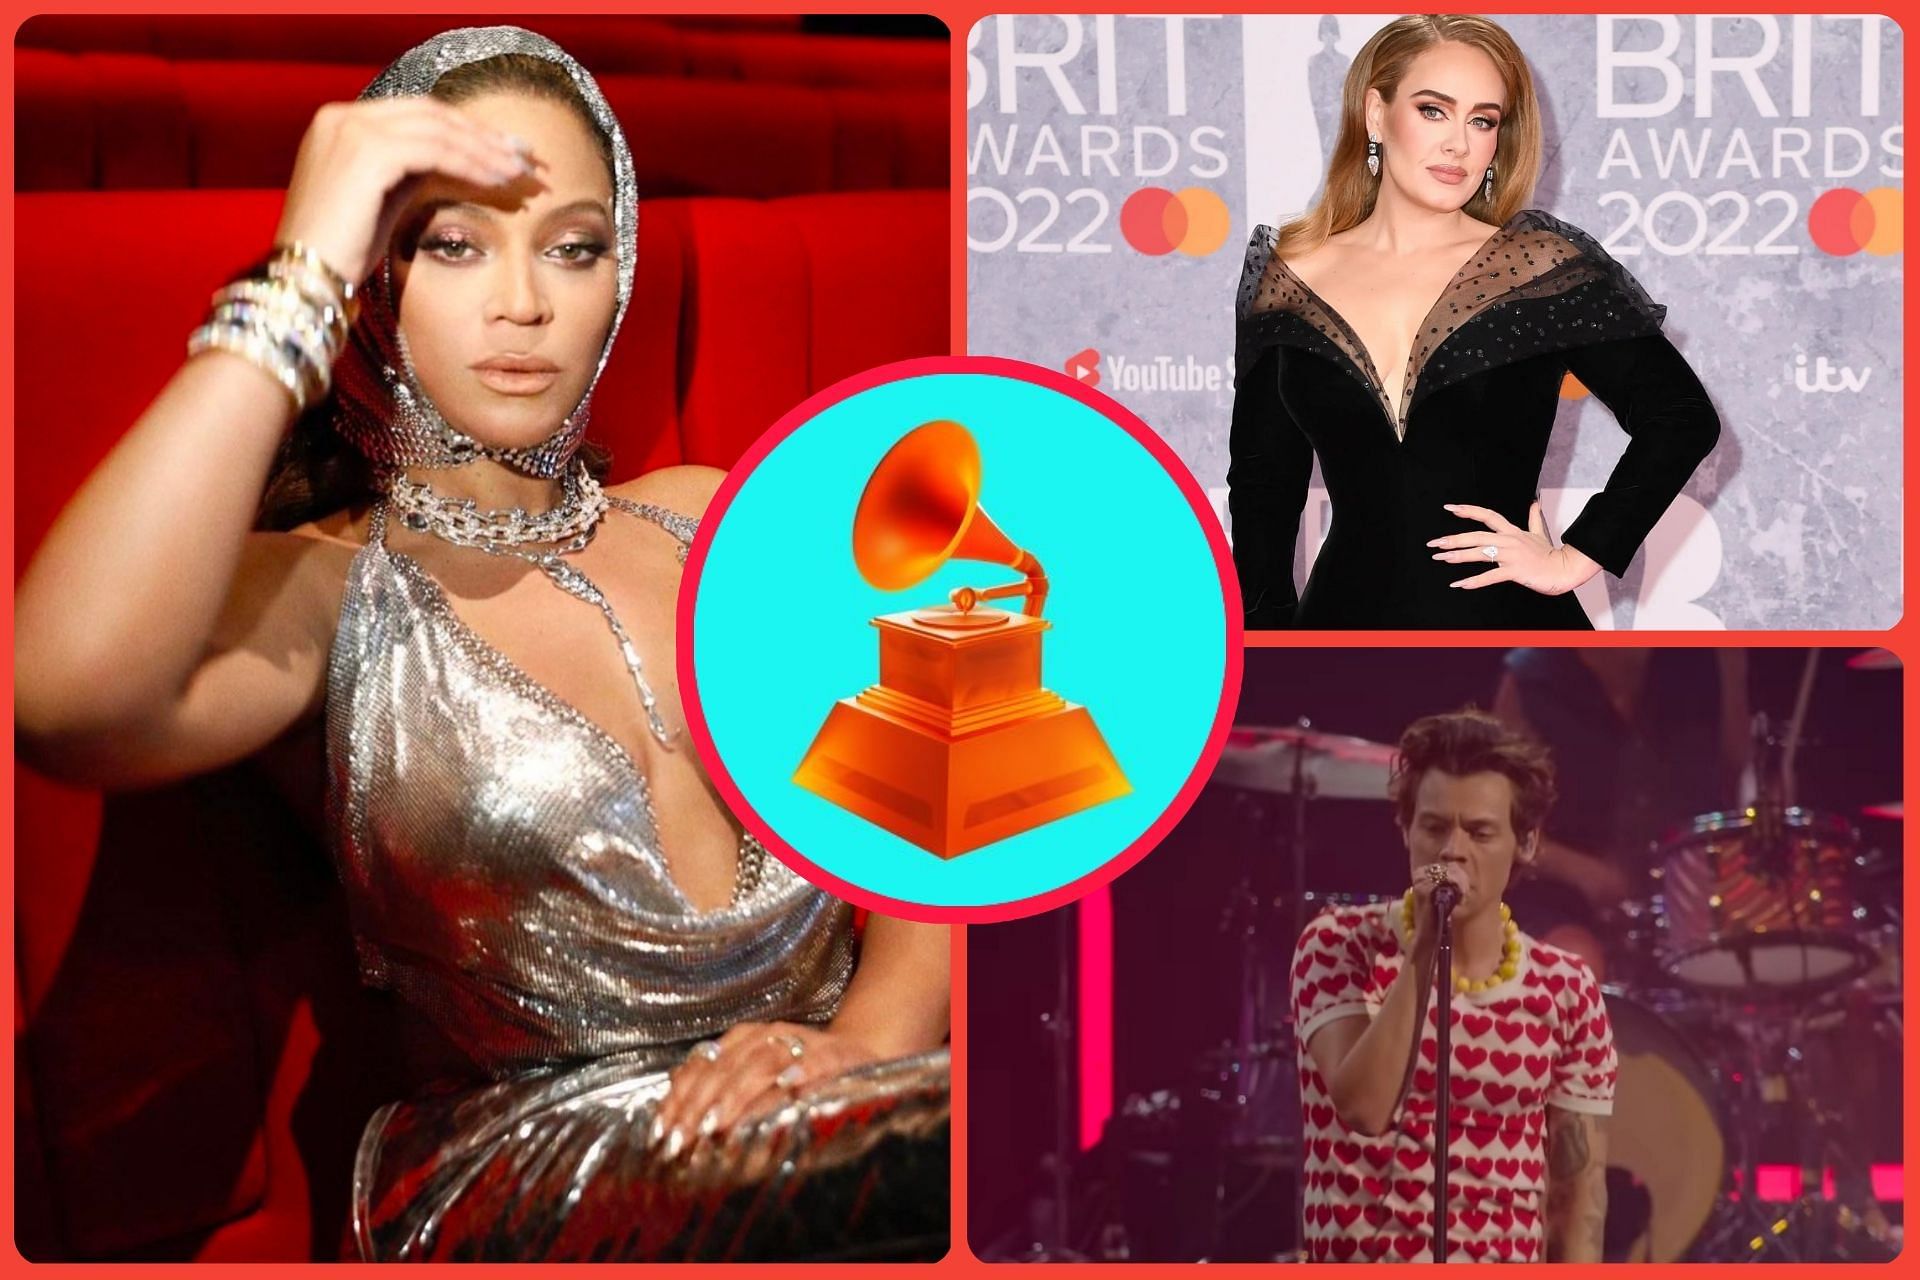 2023 Grammy Nominations revealed! (Image via Instagram/@beyonce, Getty Images/Gareth Cattermole, and Harry Styles/YouTube)